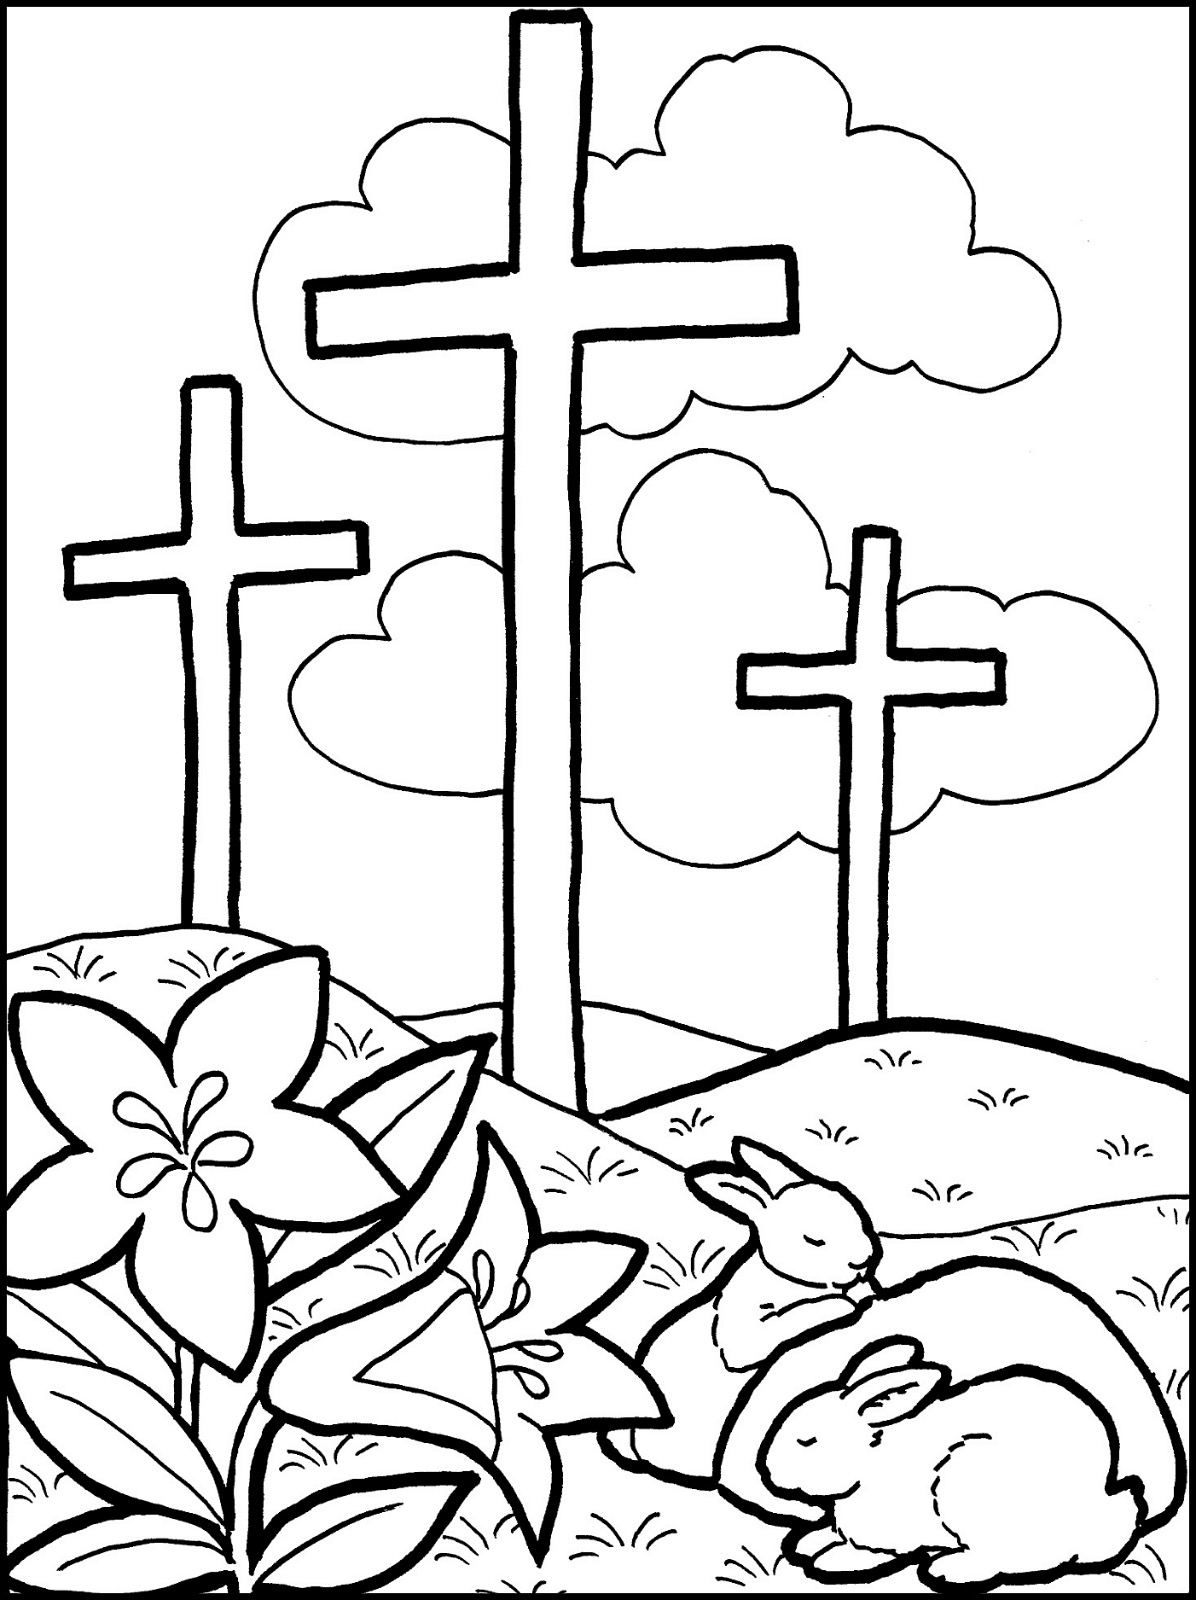 stained-glass-cross-coloring-page-at-getdrawings-free-download